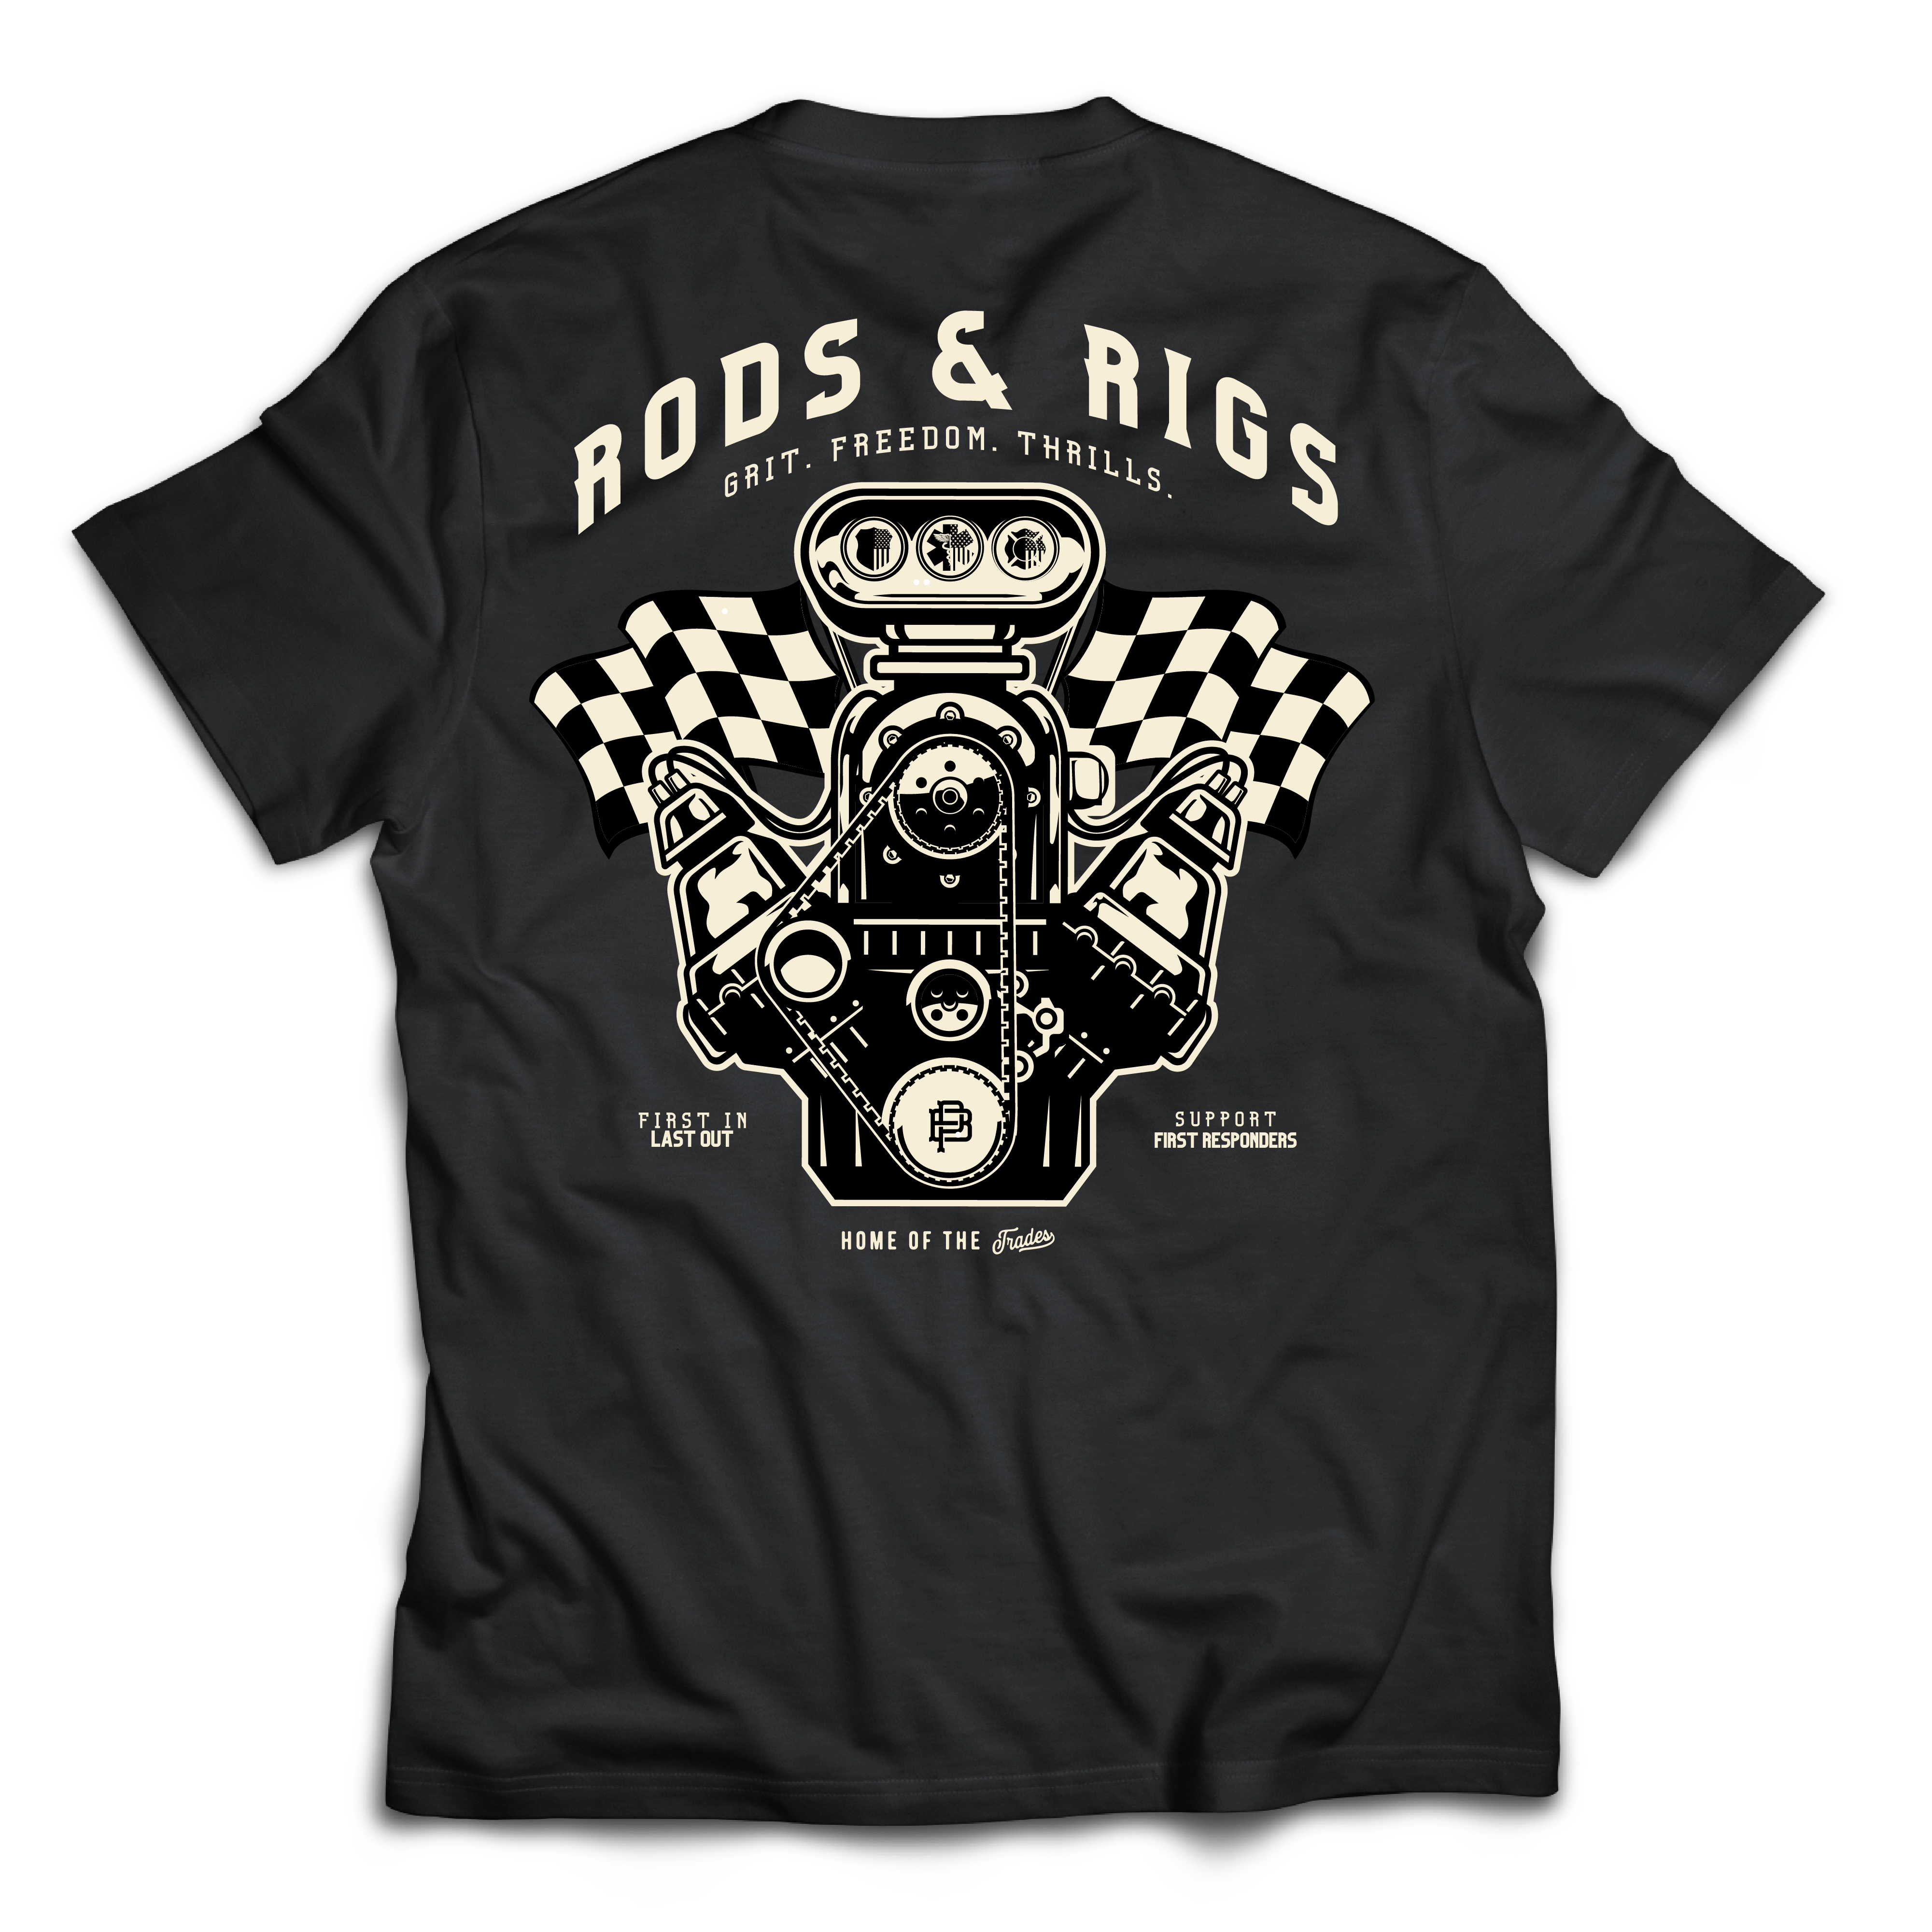 Rods & Rigs Charity Tee, Black